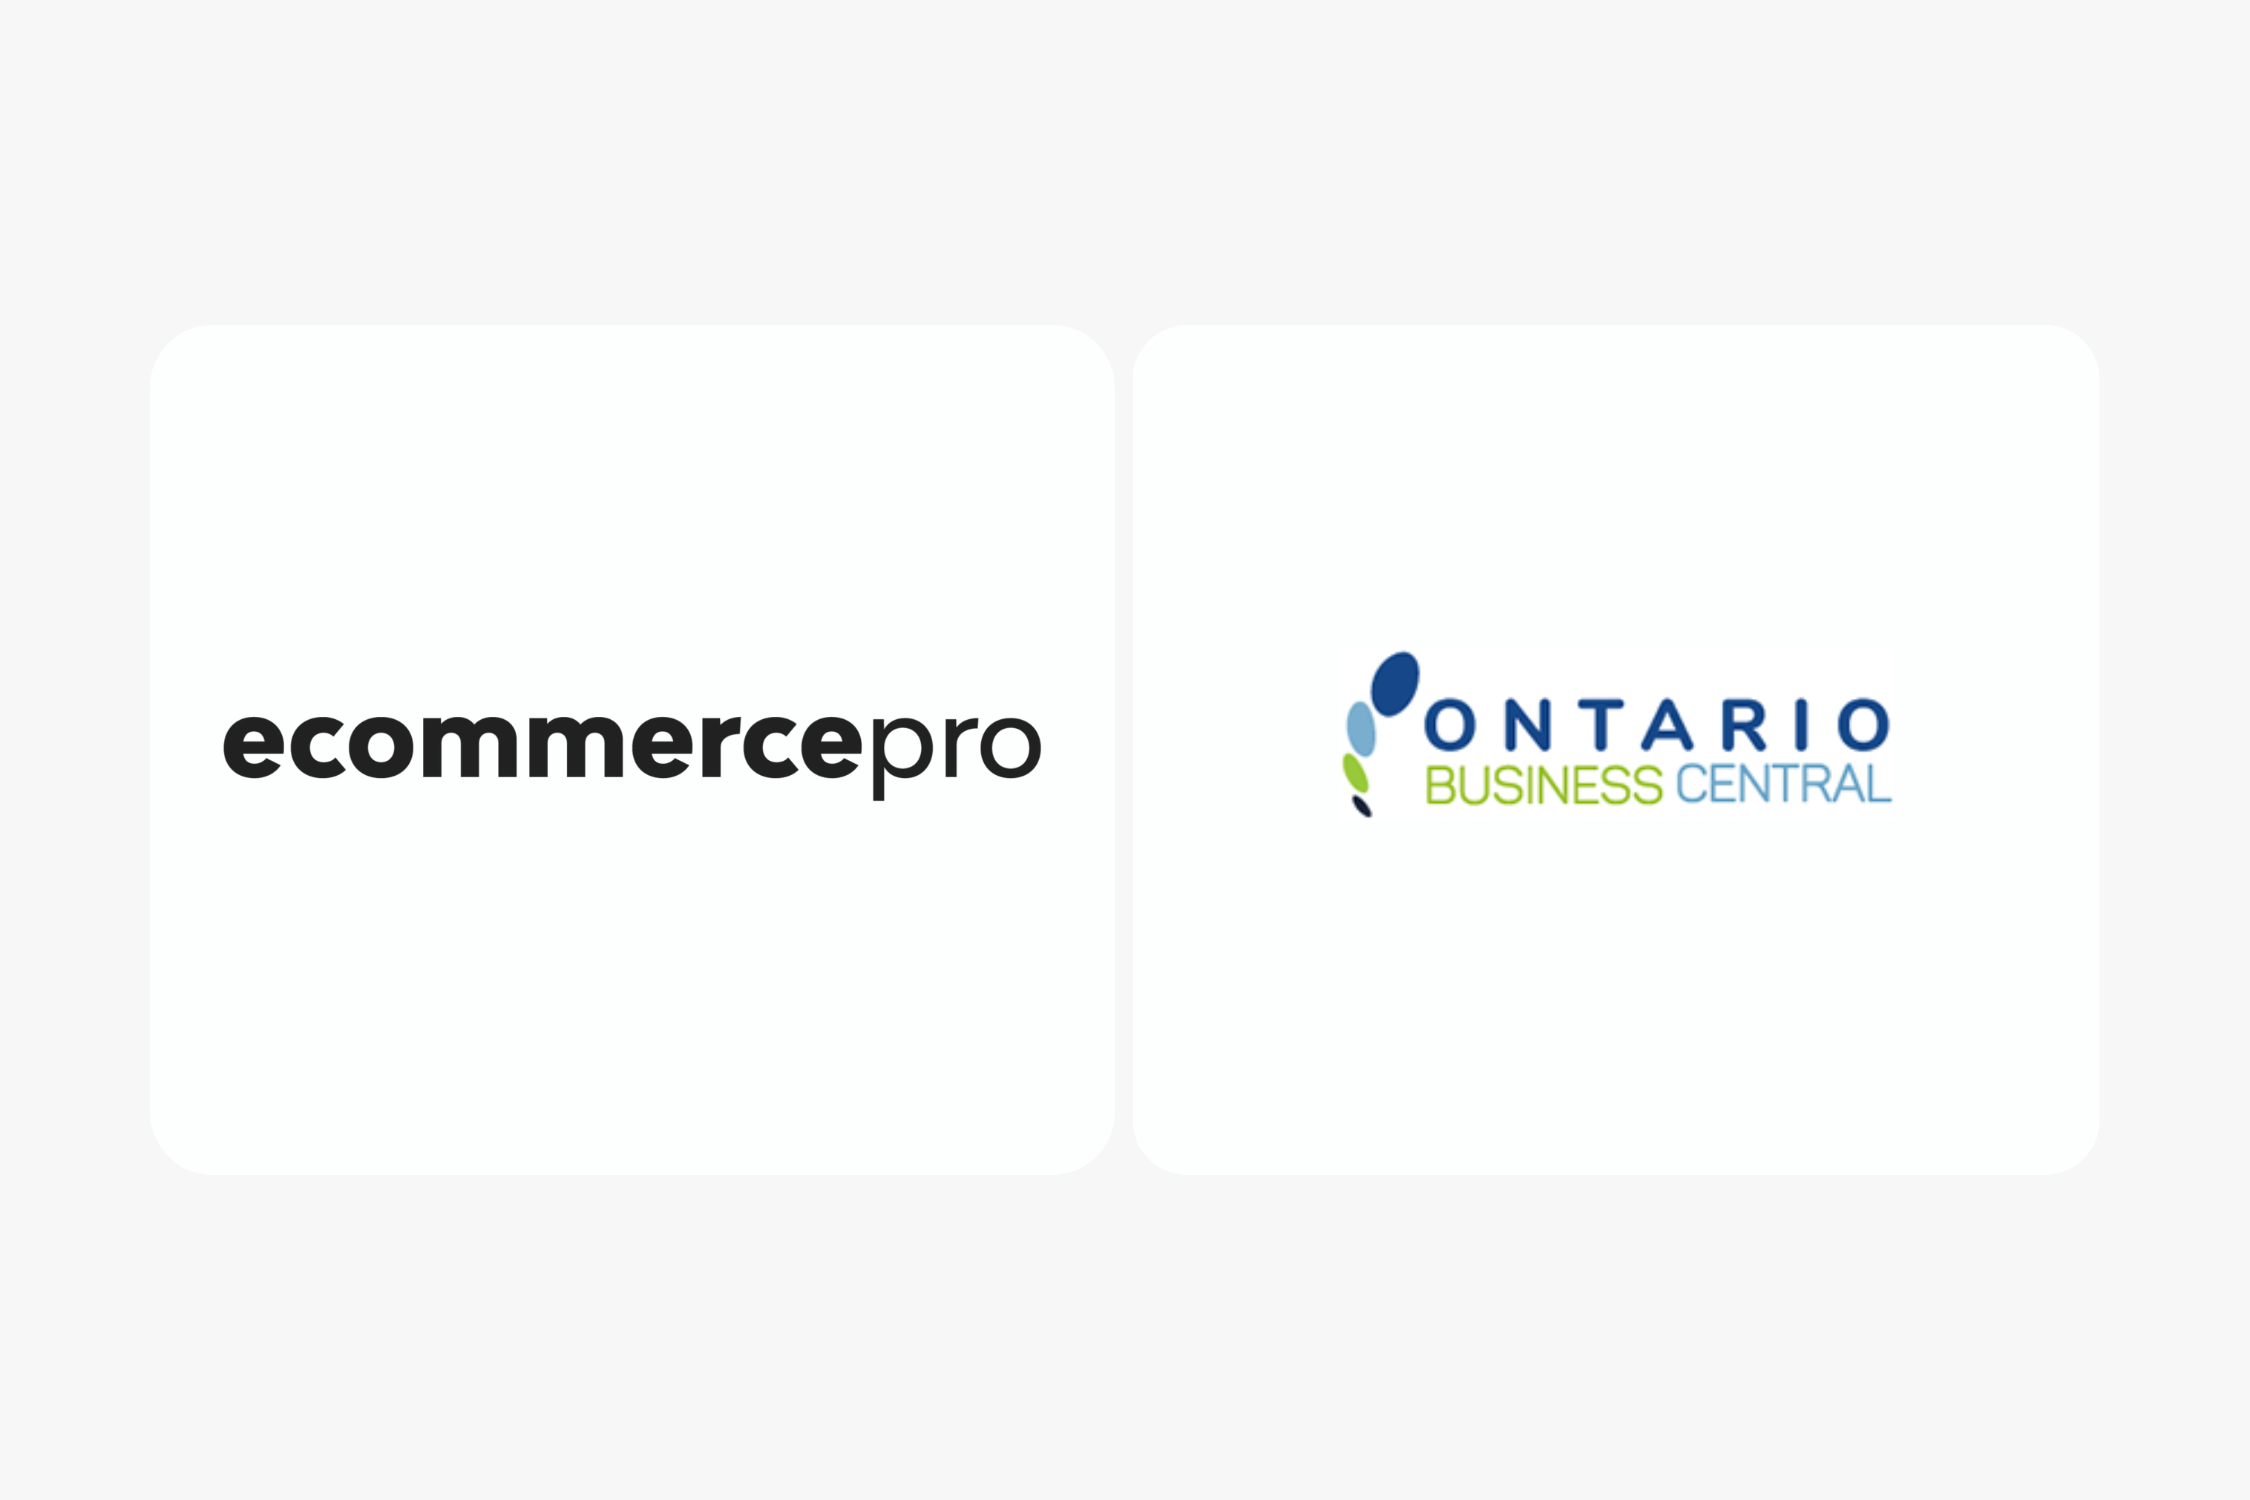 ecommerce pro and Ontario business central logos